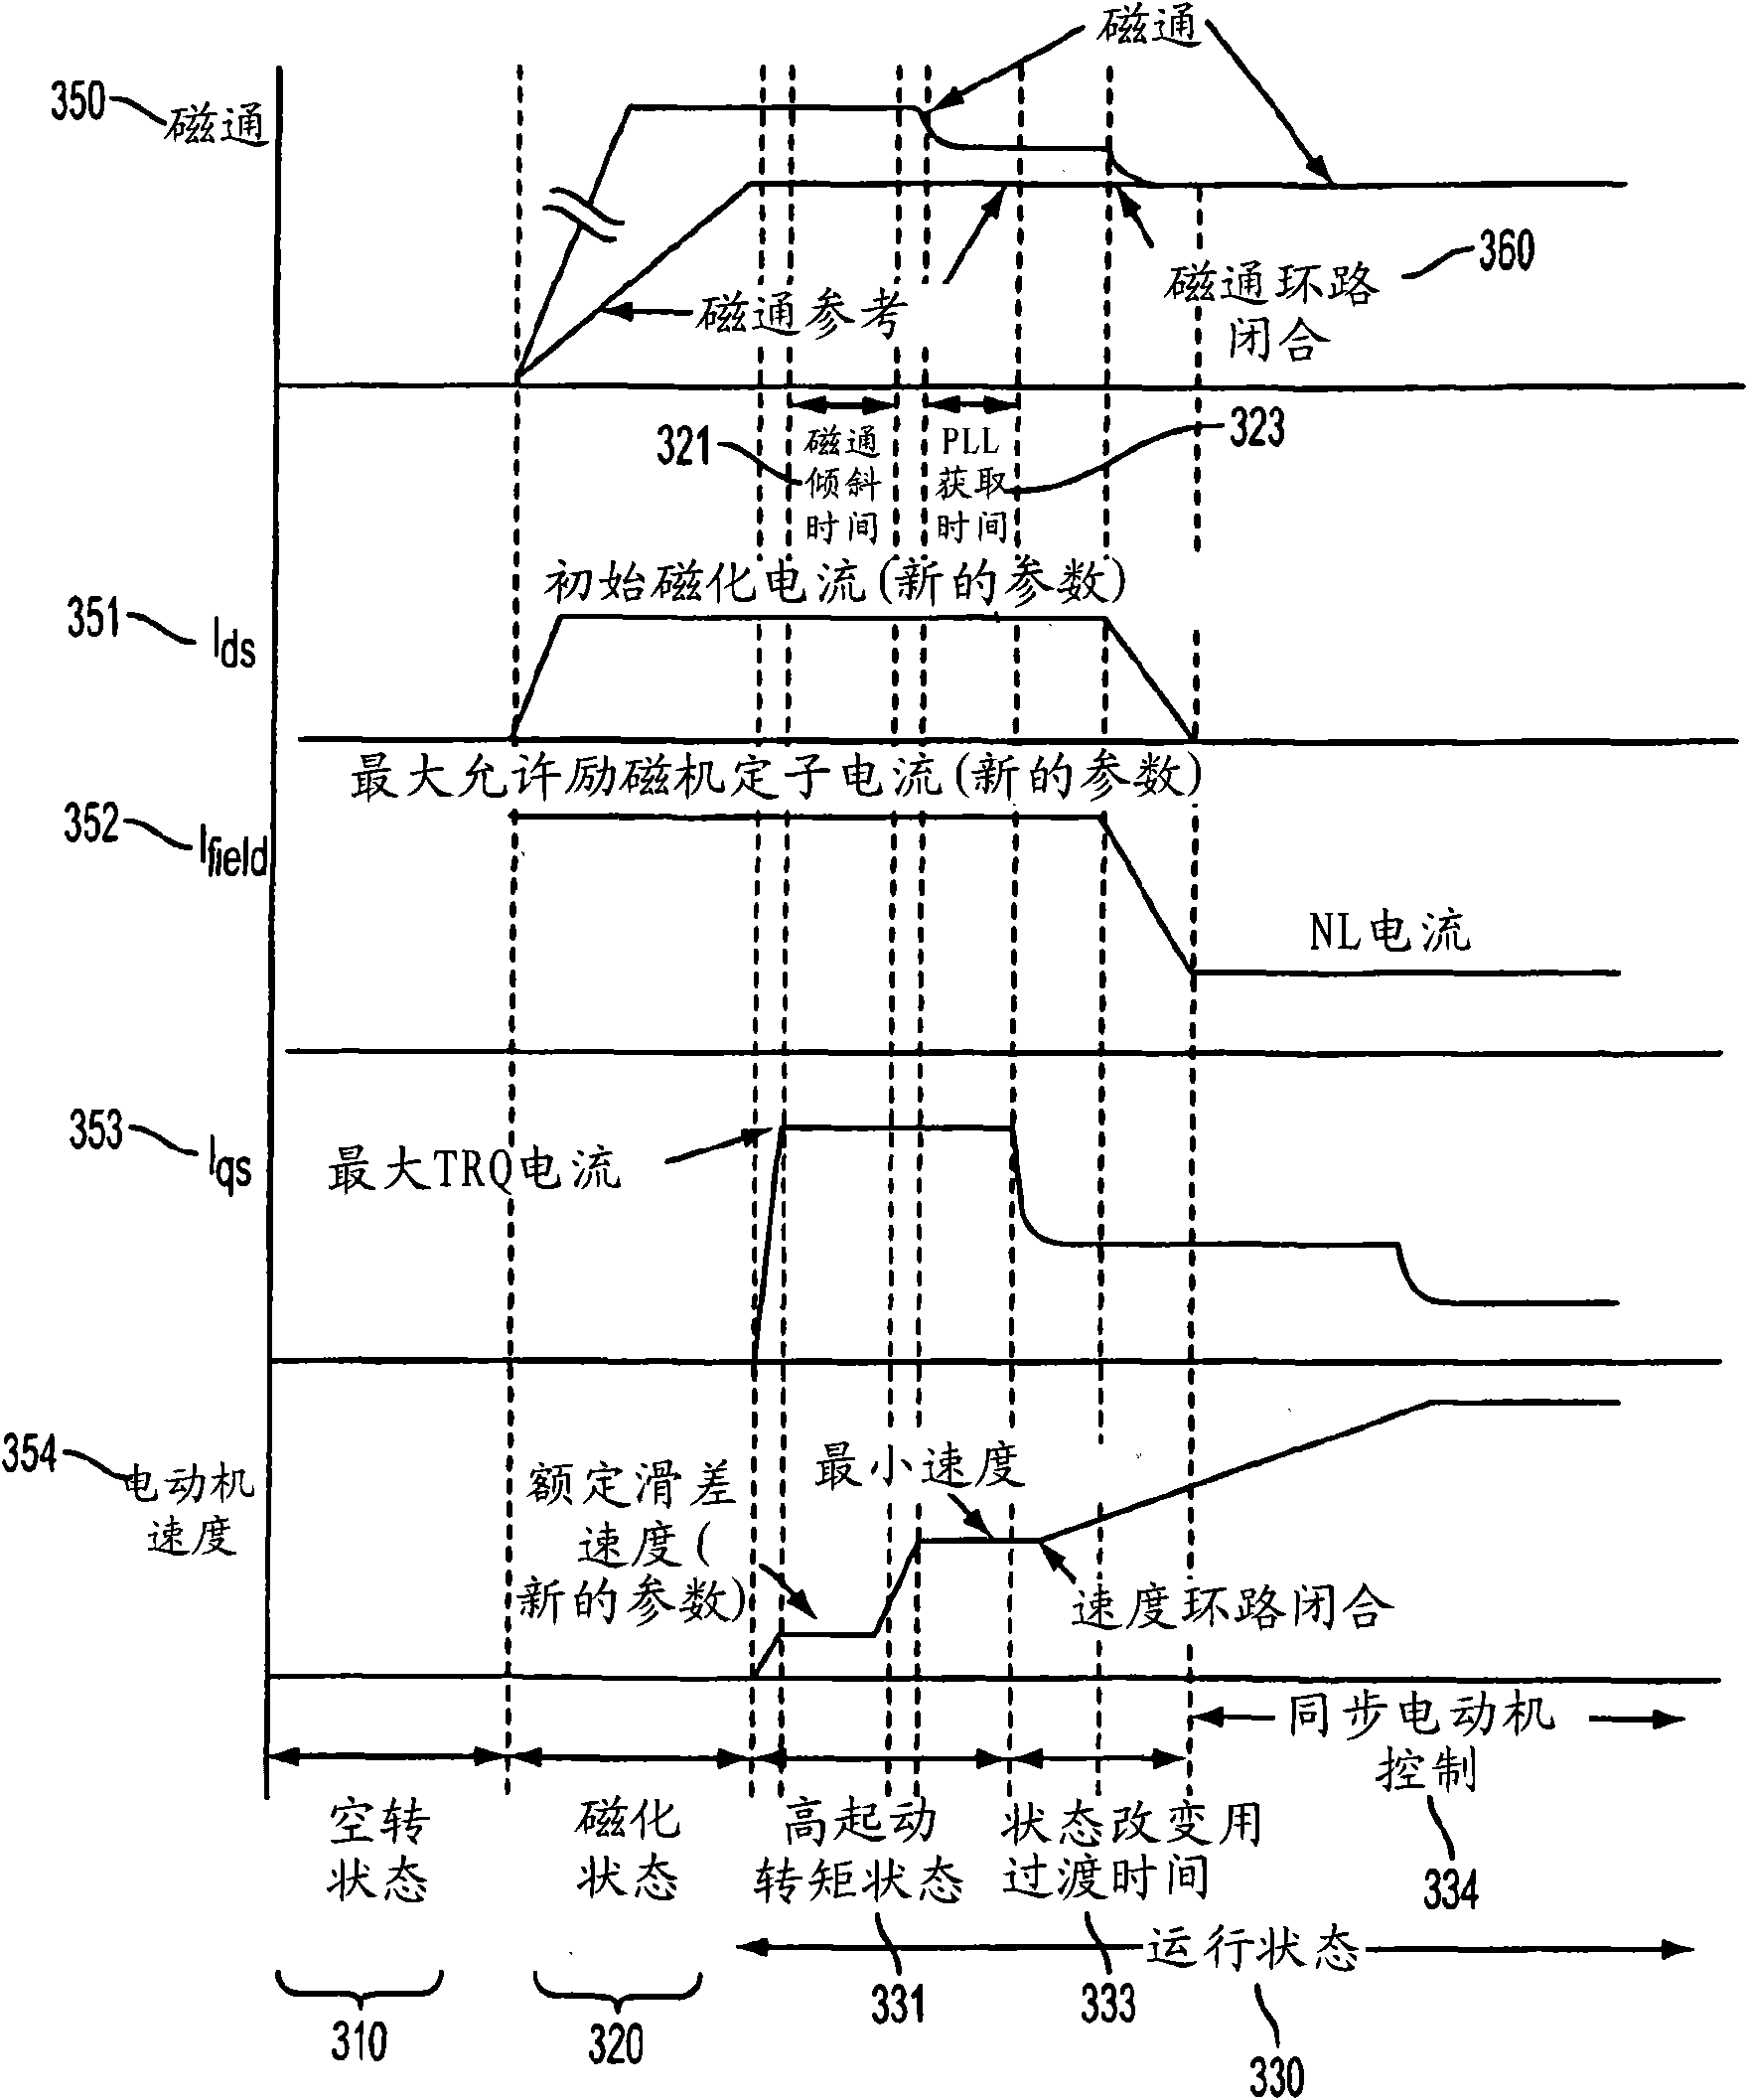 Method of starting a synchronous motor with a brushless DC exciter